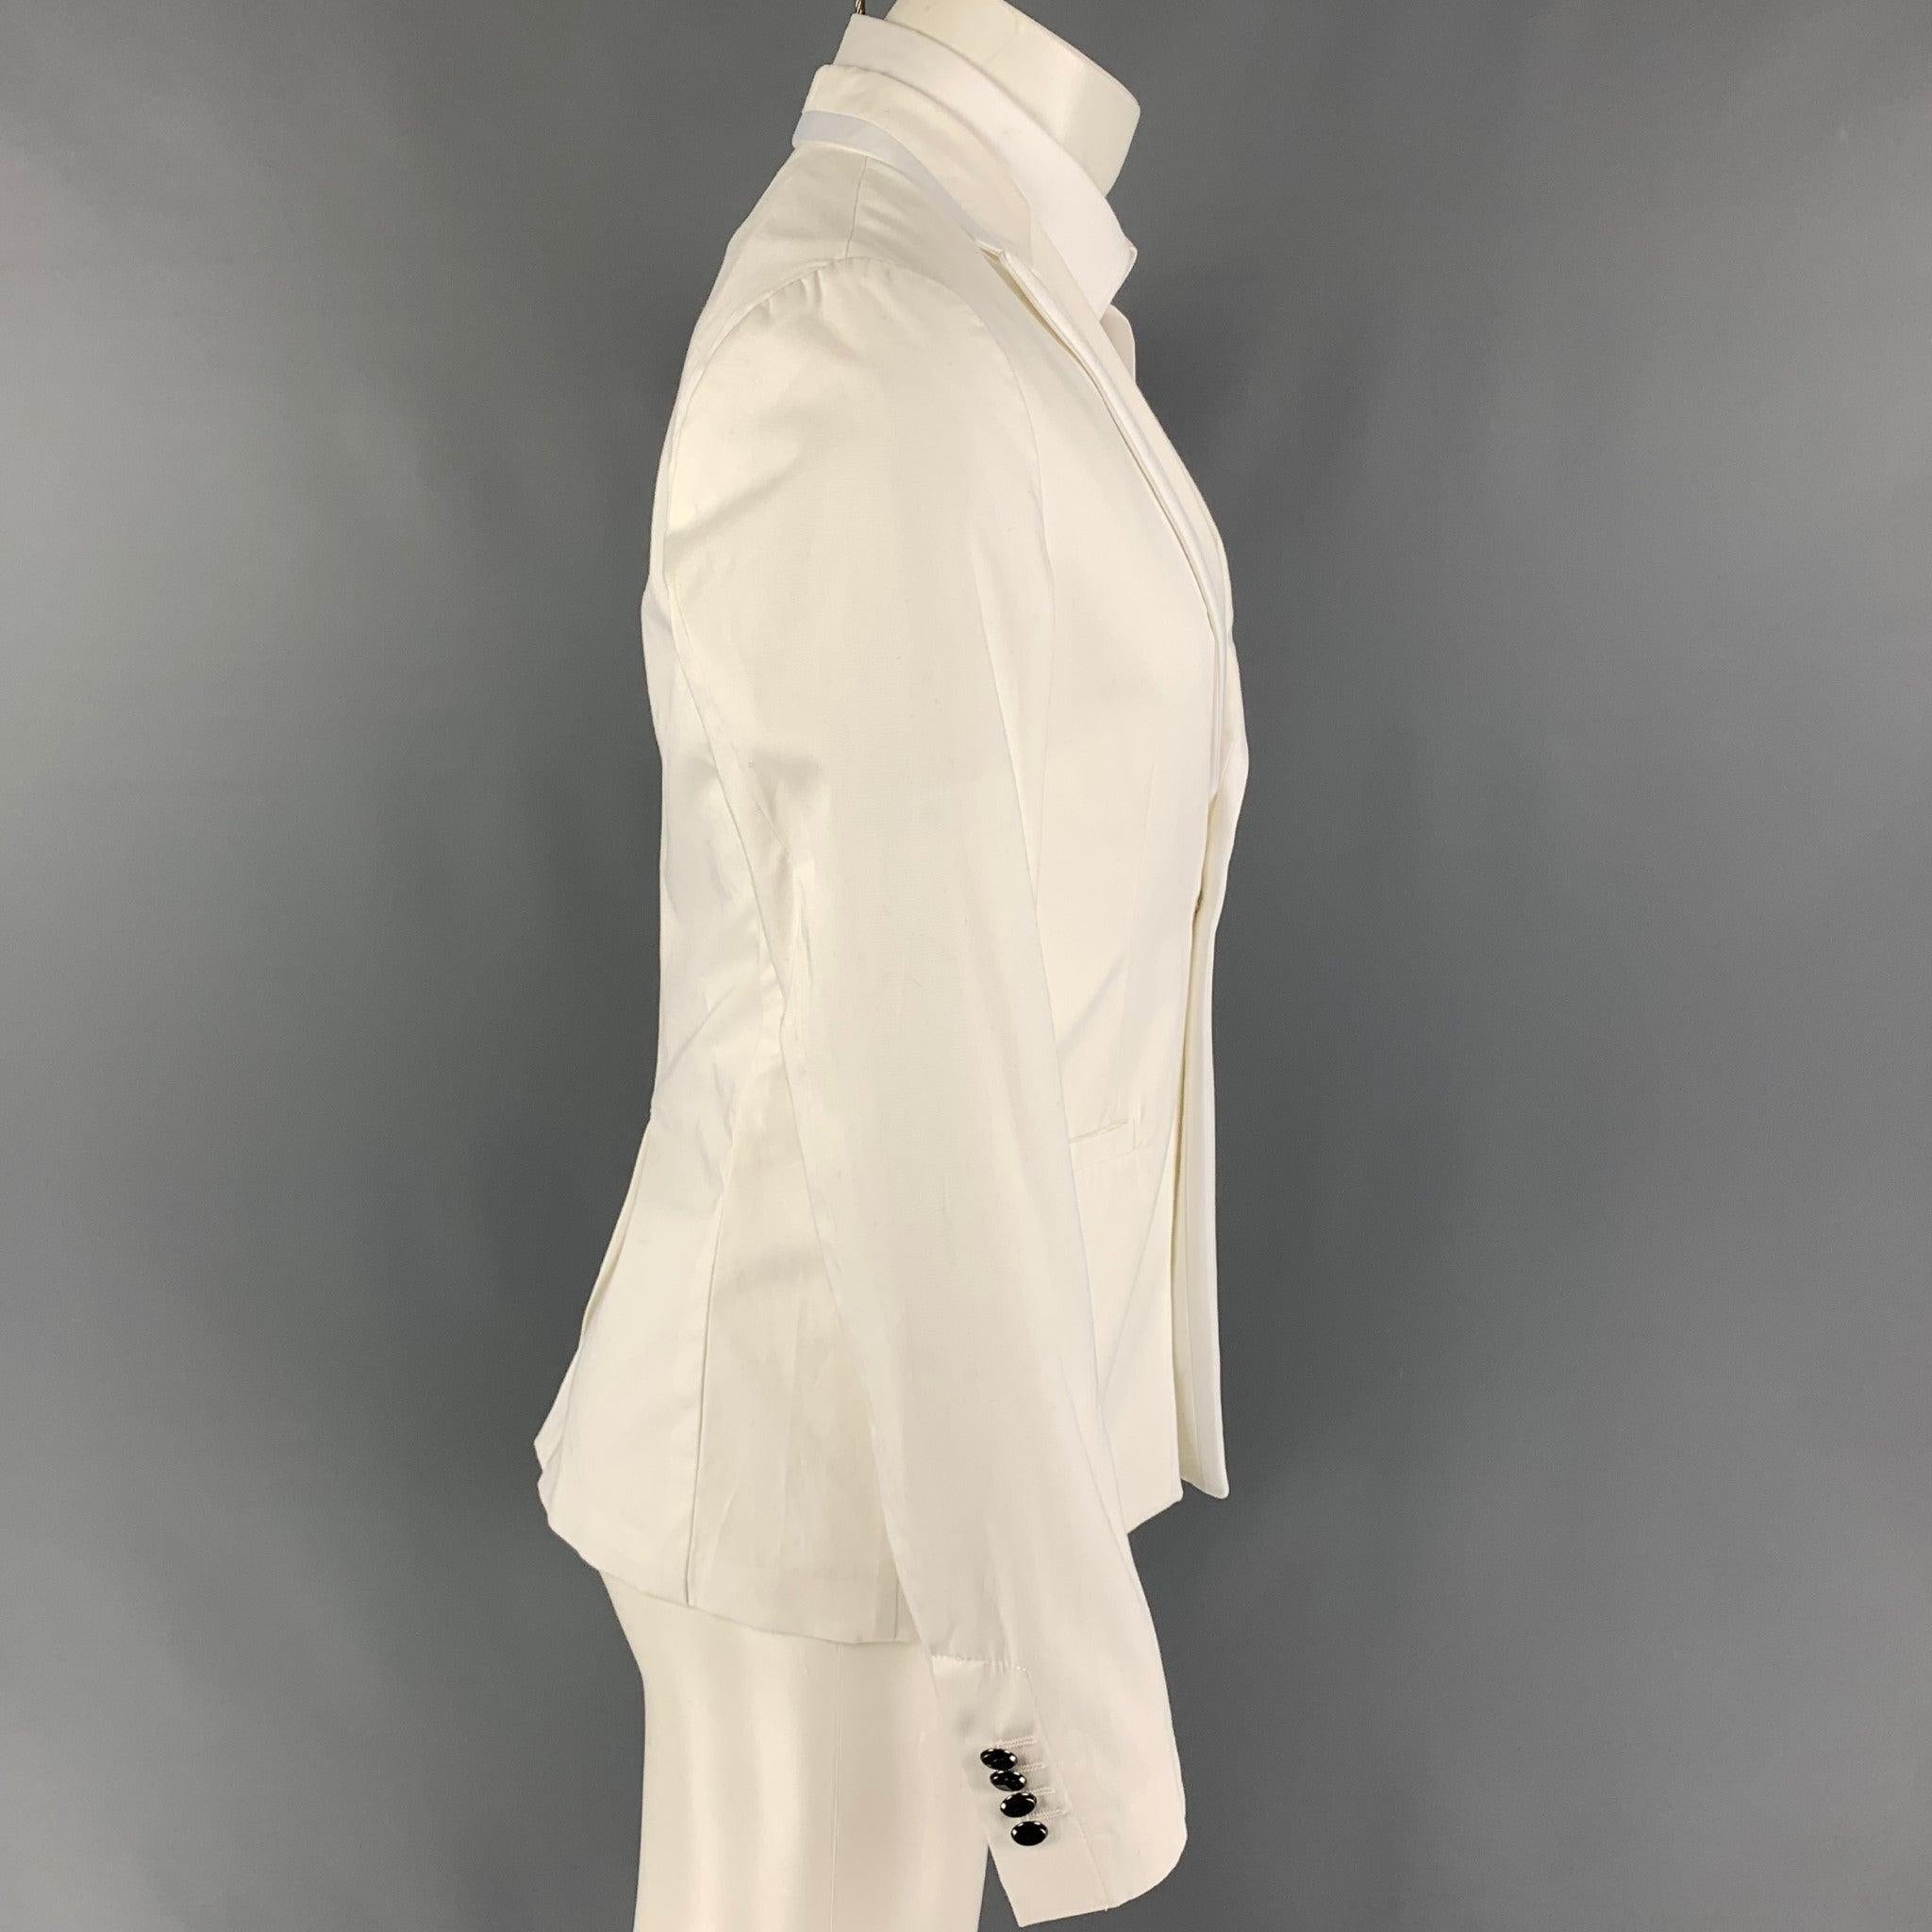 JUST CAVALLI sport coat comes in a white cotton featuring a peak lapel, slit pockets, single back vent, and a single button closure. Made in Italy. Very Good Pre-Owned Condition. 

Marked:   48 

Measurements: 
 
Shoulder: 17 inches Chest: 38 inches